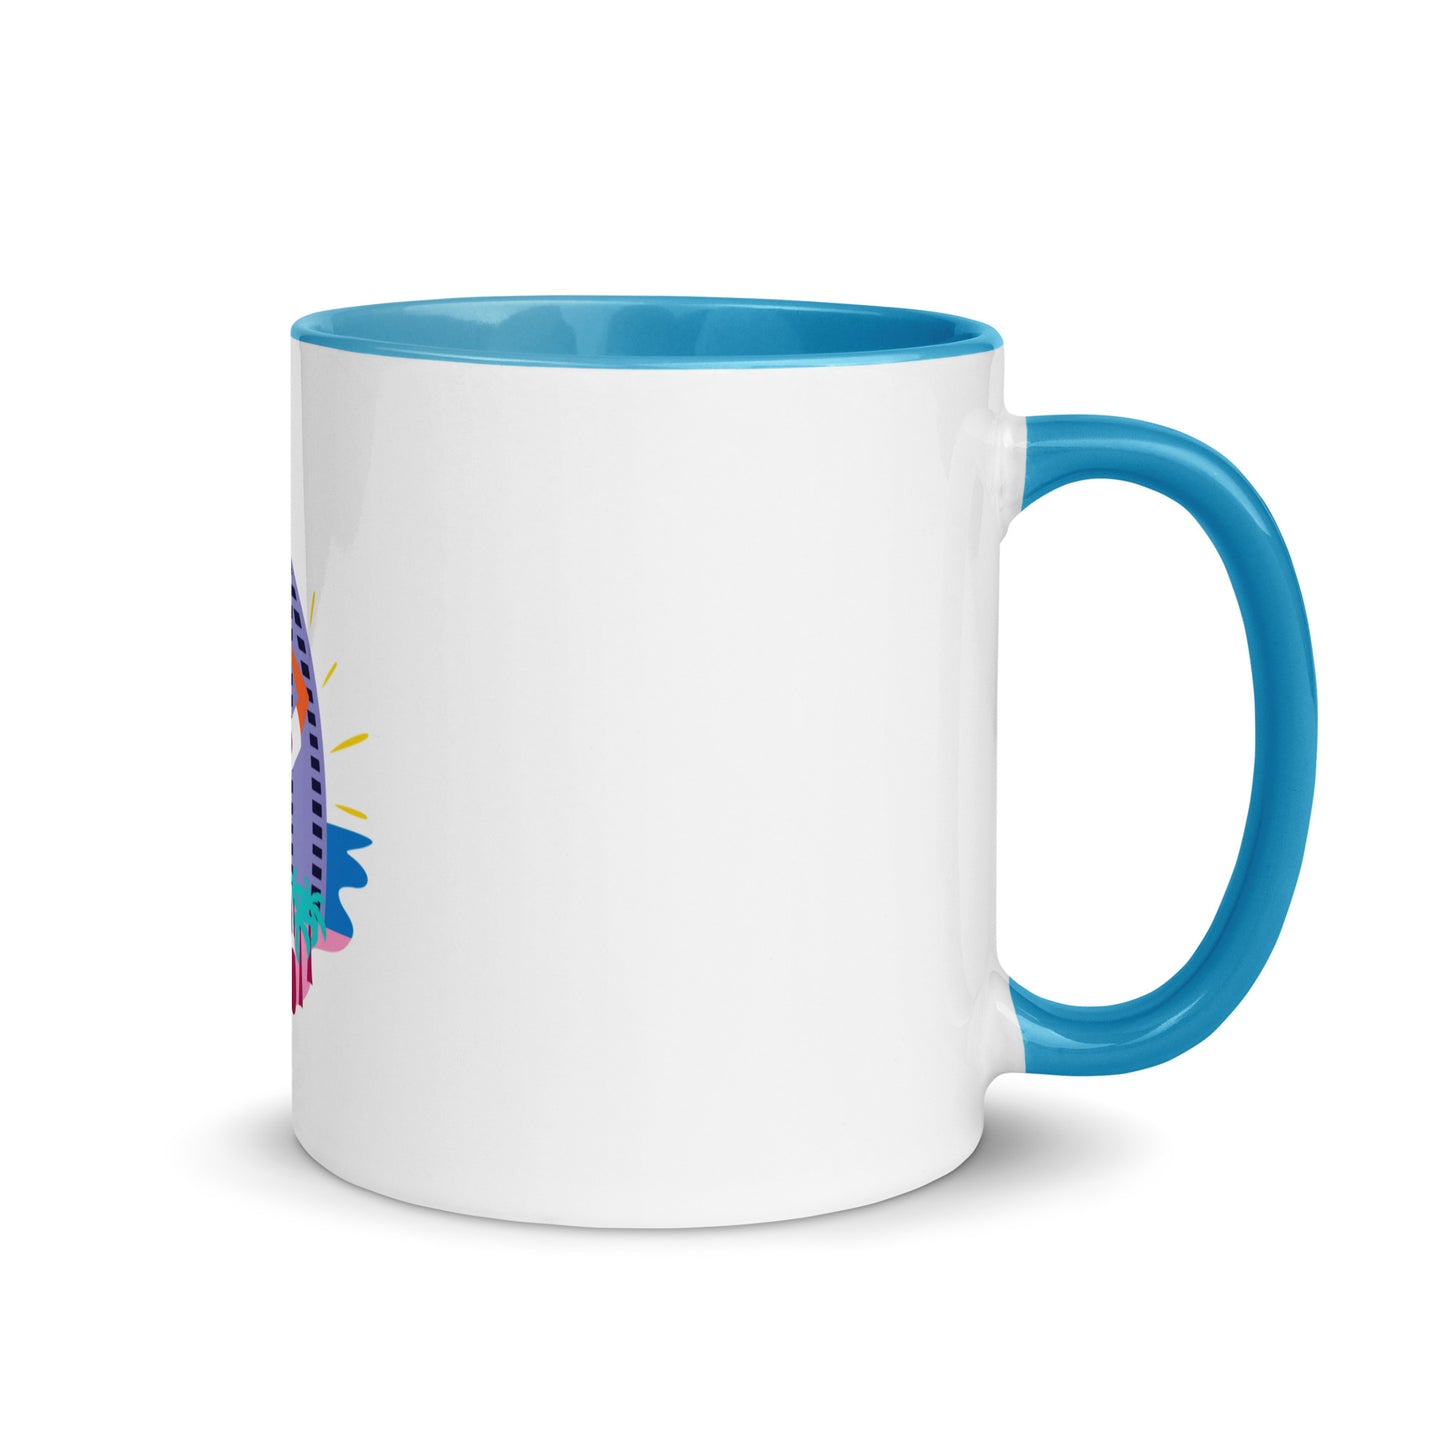 GOAL IS THE GOAL Mug with Color Inside